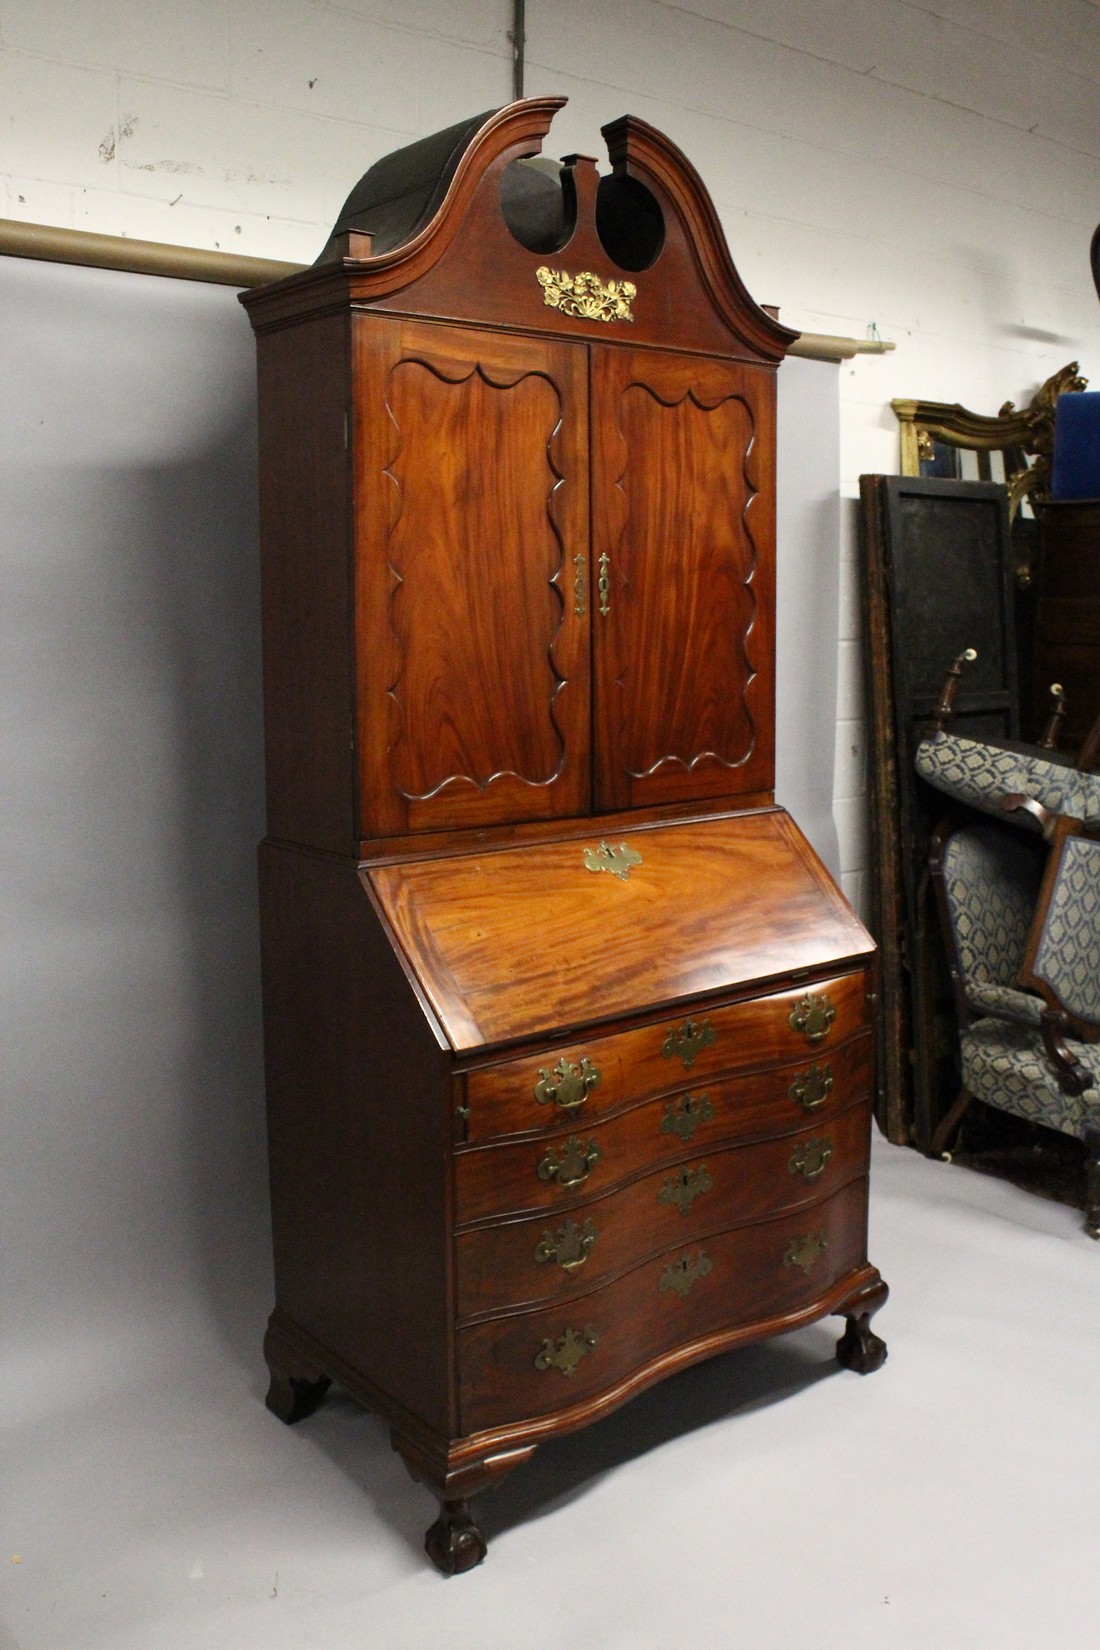 A SUPERB 18TH CENTURY AMERICAN, BOSTON, MAHOGANY, BUREAU BOOKCASE, the top with shaped cornice - Image 2 of 15